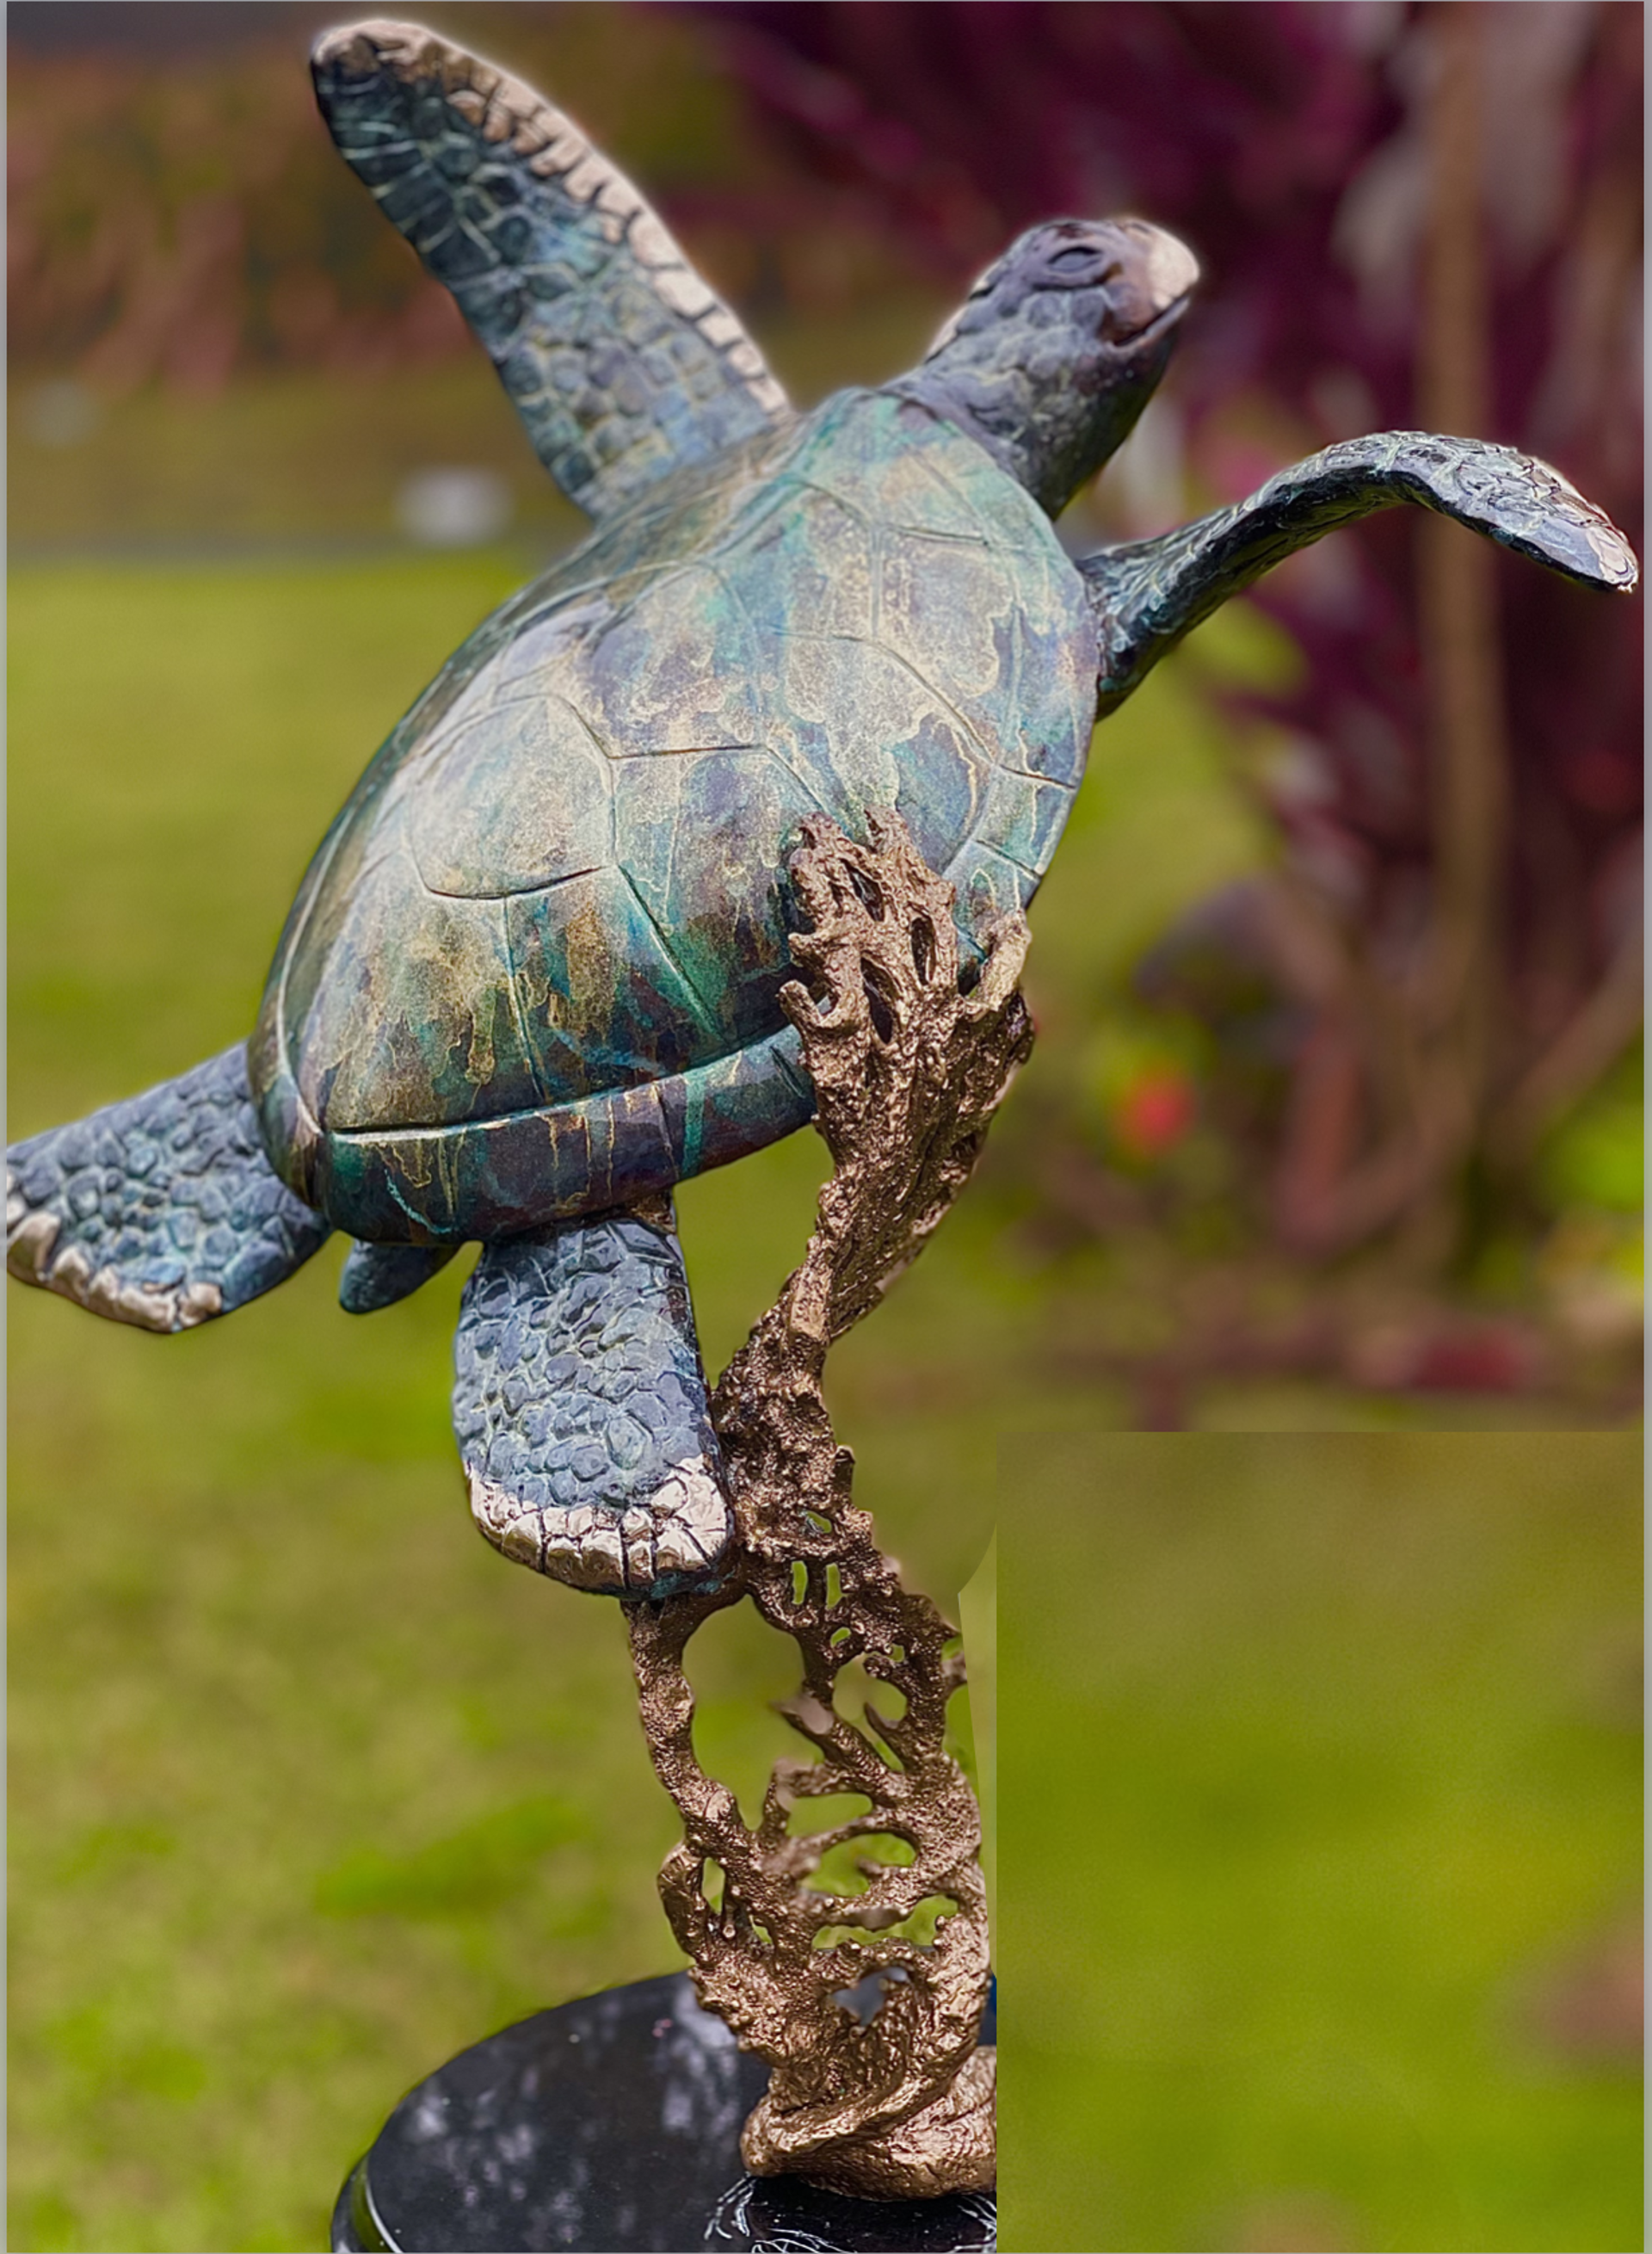 Honu Mana (on Lace Coral) by Scott Hanson